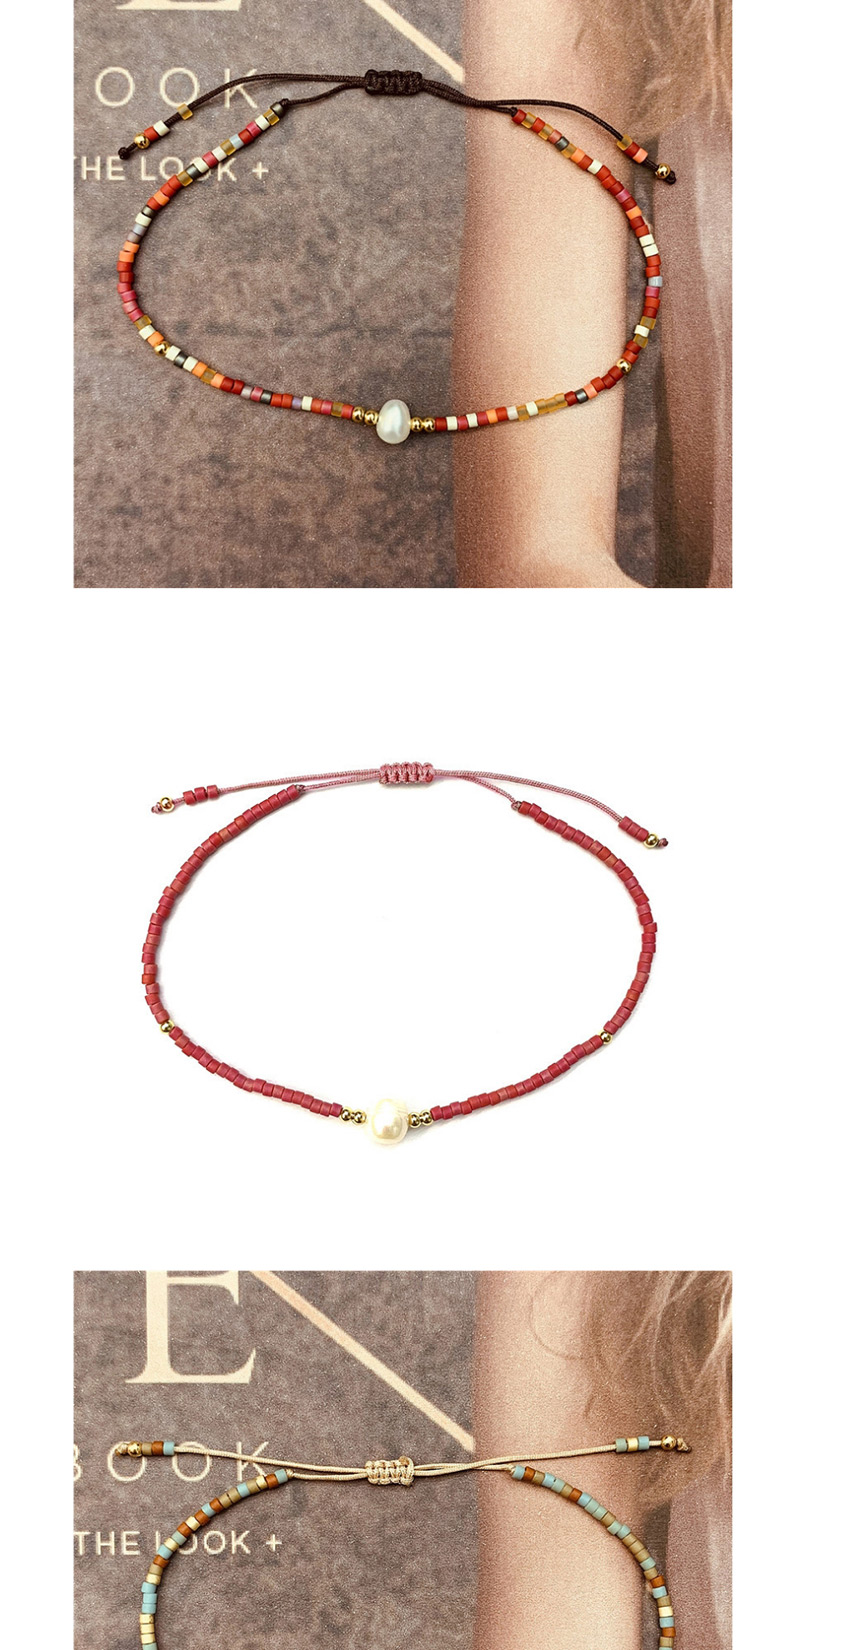 Fashion Rust Red Rice Beads Hand-woven Natural Freshwater Pearl Bracelet,Beaded Bracelet